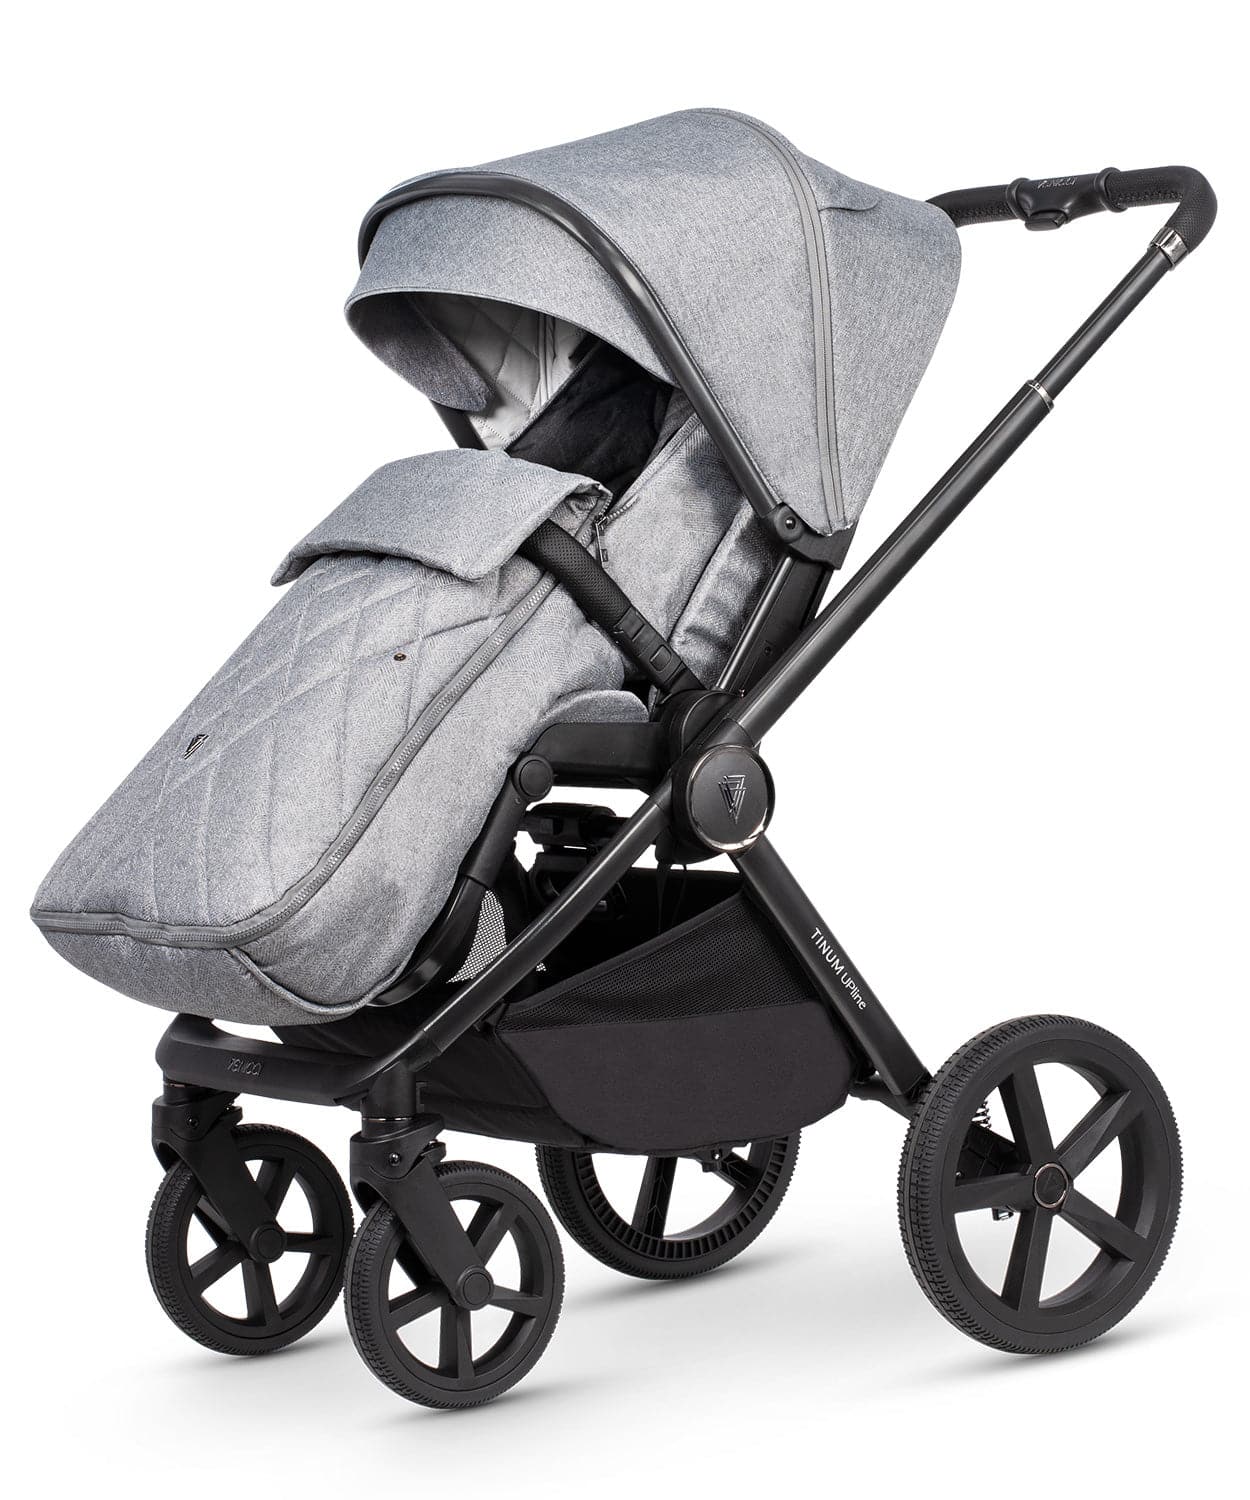 Venicci Tinum Upline 3 in 1 Travel System Bundle + Base - Classic Grey - For Your Little One